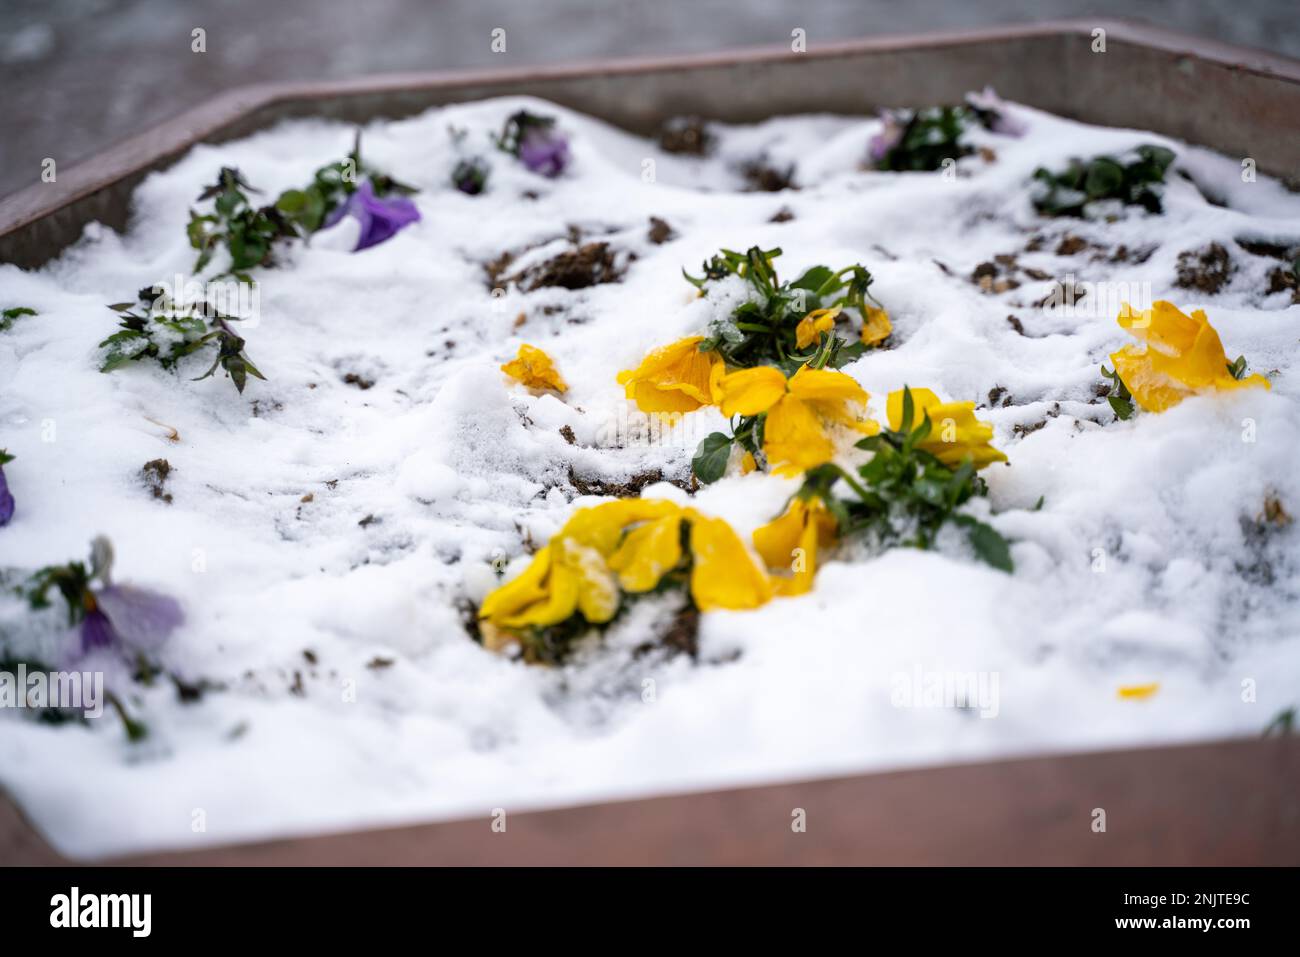 Pansies snow. Snow on a yellow pansy Viola tricolor flower during early spring storm Stock Photo